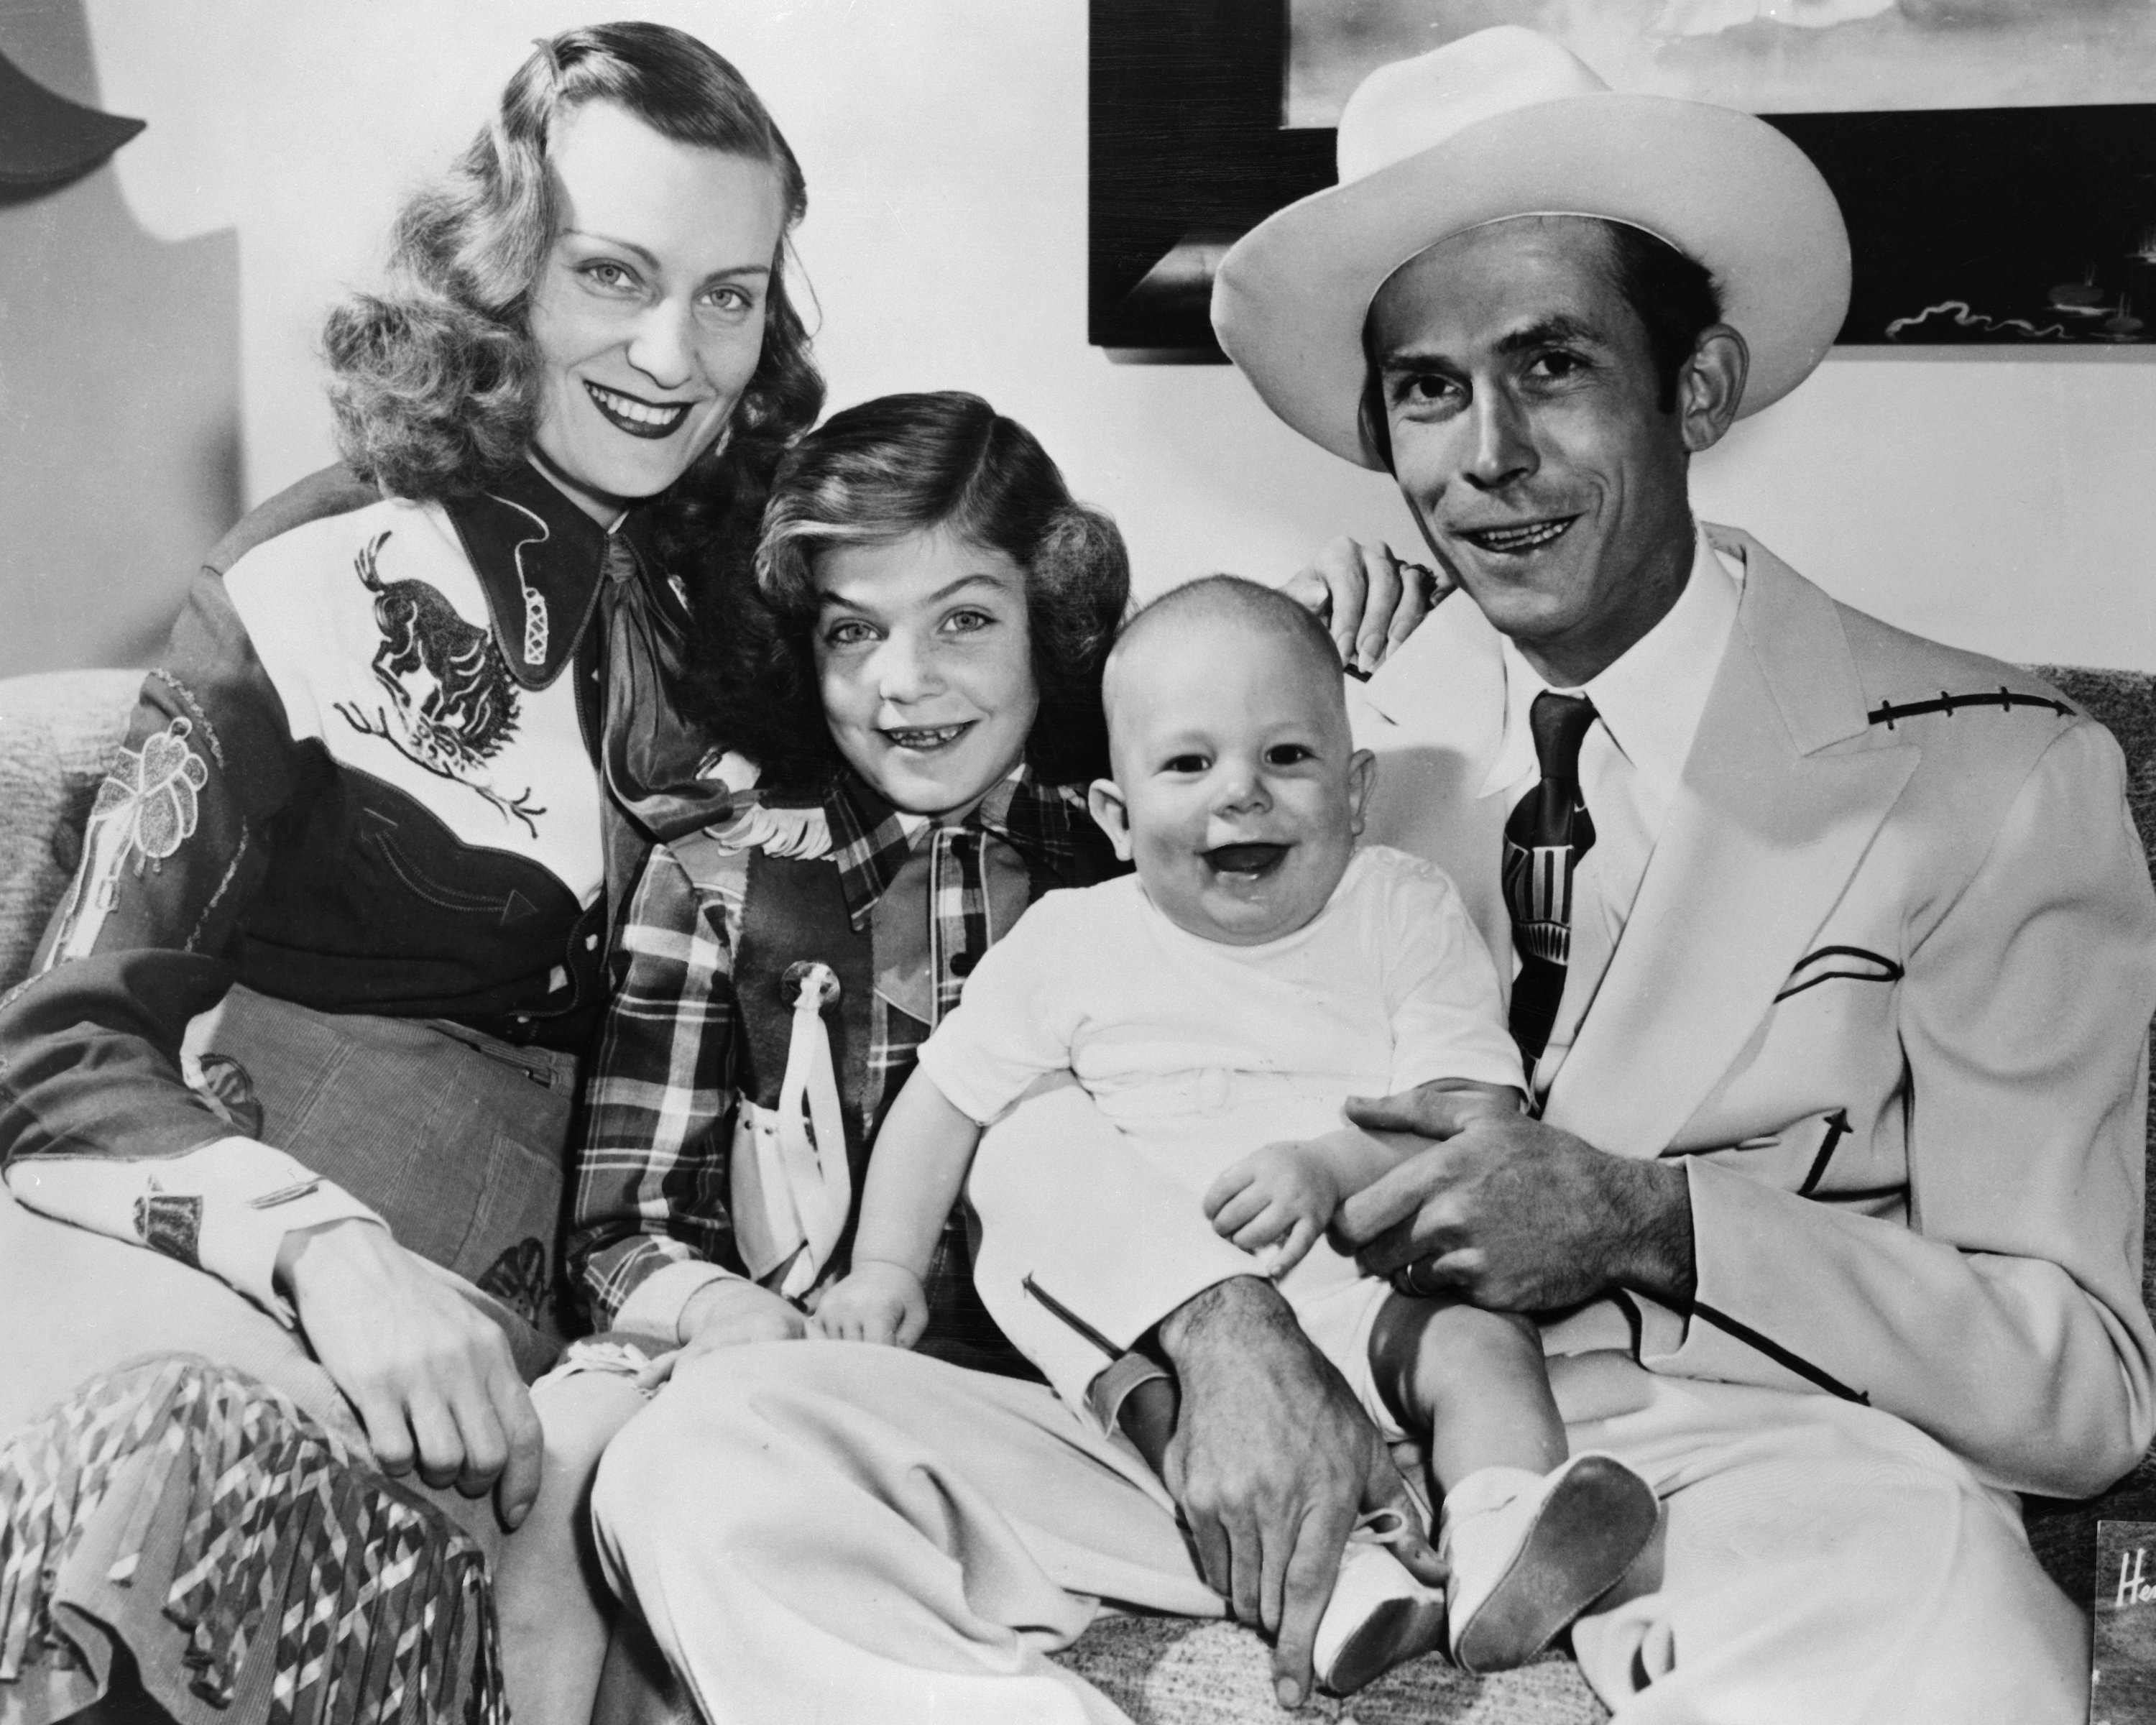 Portrait of Audrey Williams and Hank Williams Sr. with their children Lycrecia and Hank Williams Jr. | Source: Getty Images